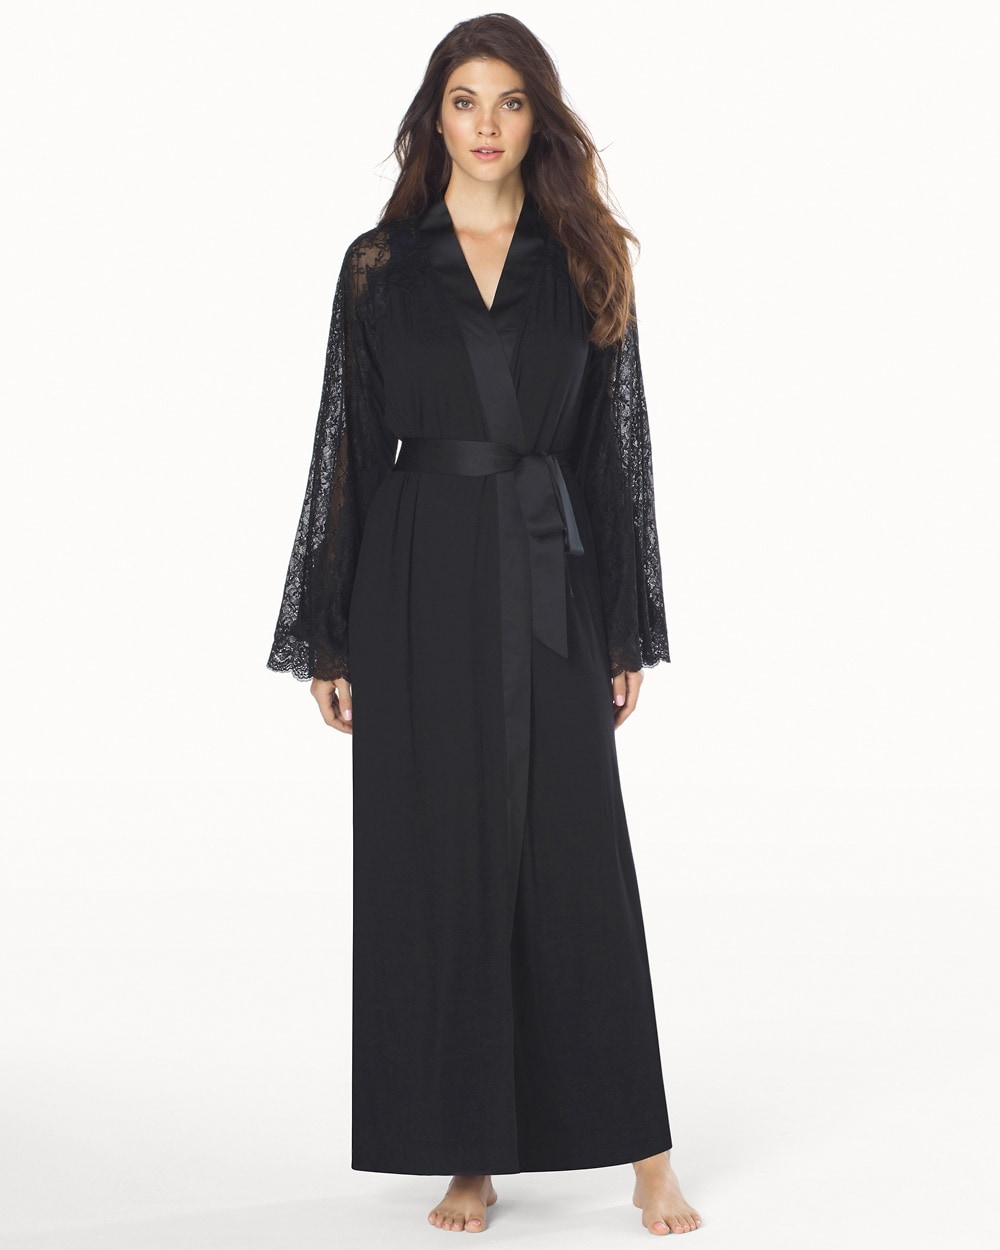 Cool Nights Lace Long Robe Black With Black Lace